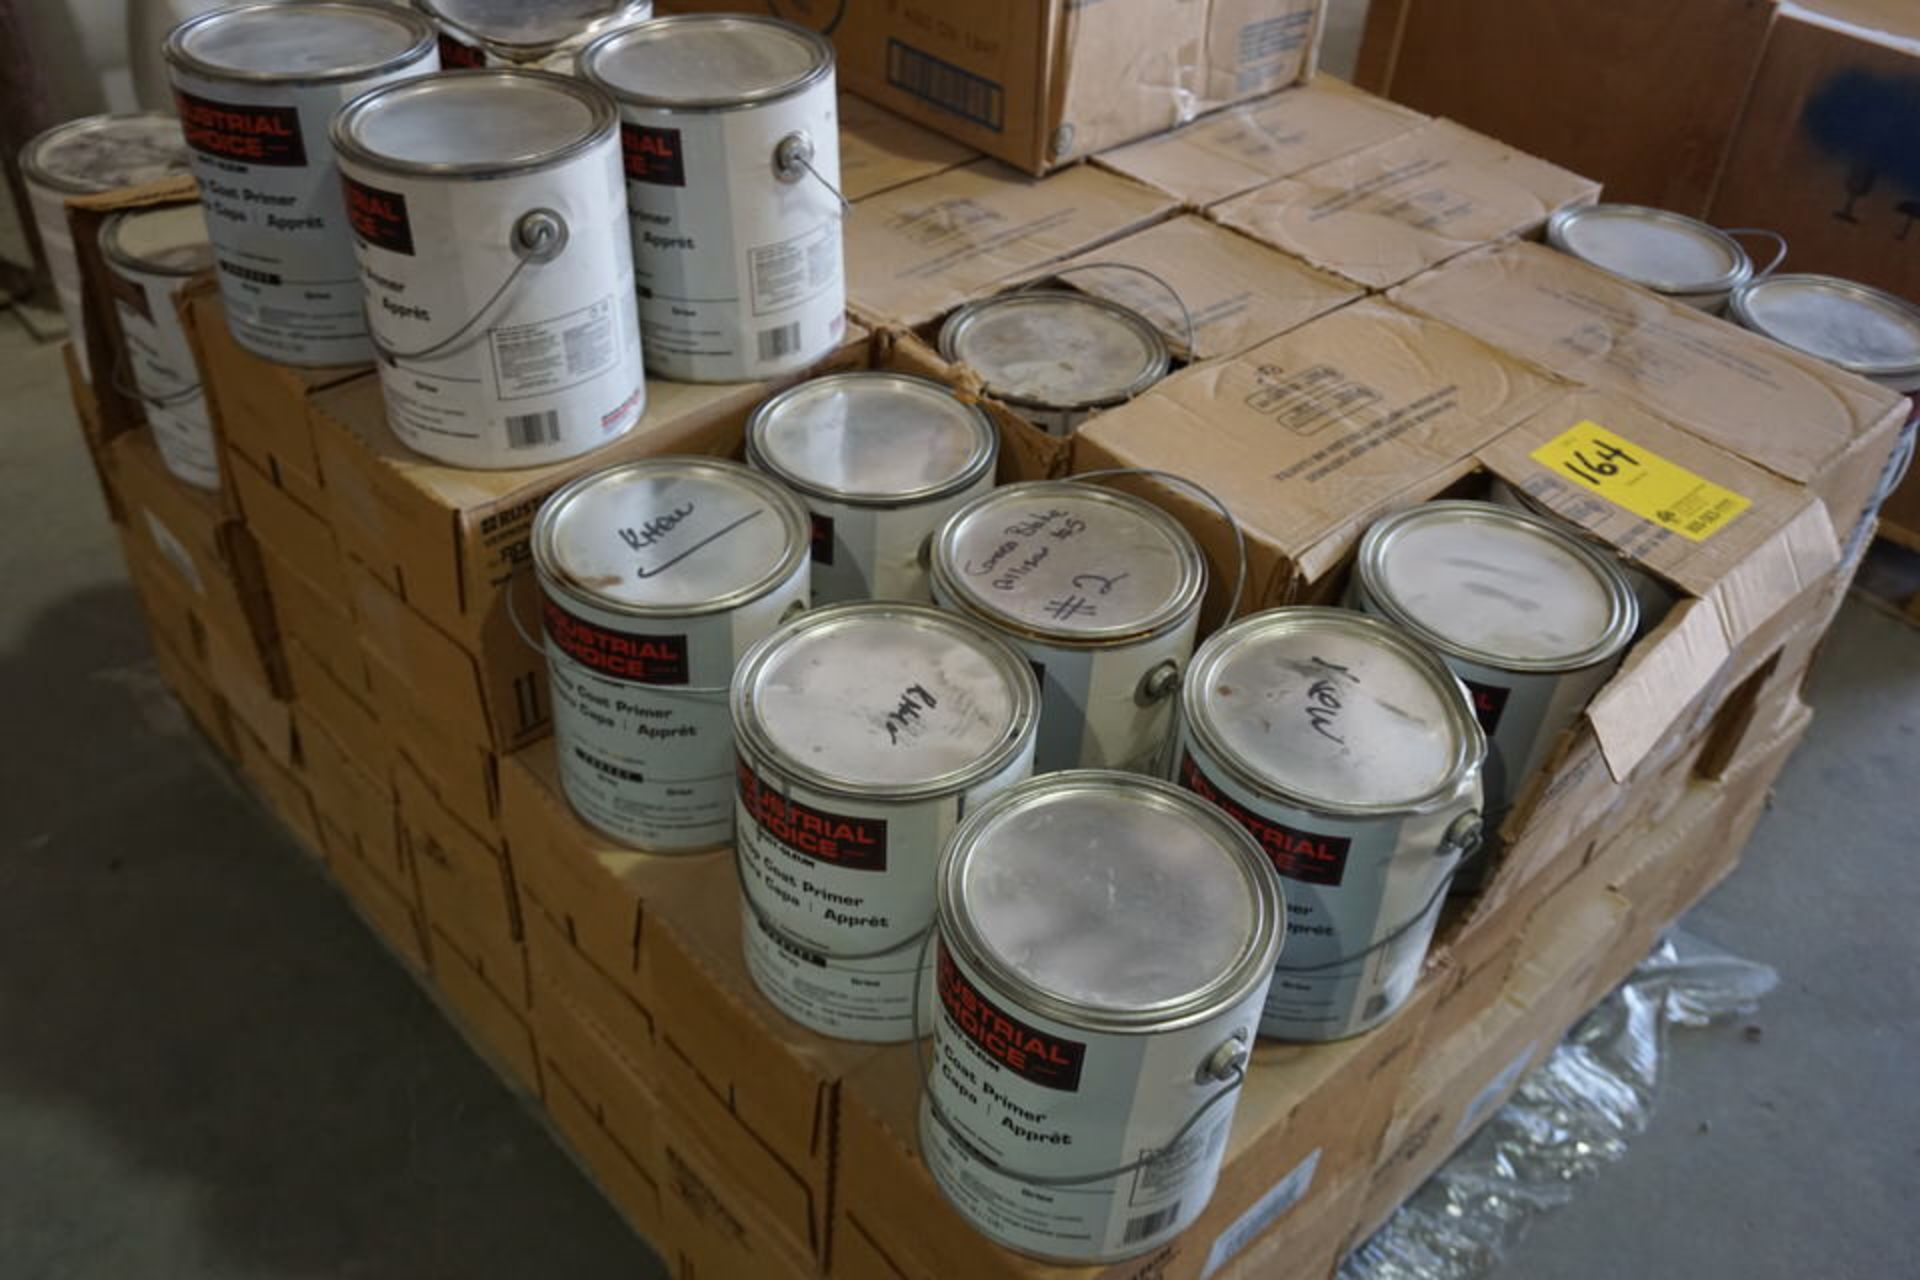 INDUSTRIAL CHOICESHOP COAT GREY PRIMER APPROX 100 GALLONS - Image 2 of 3